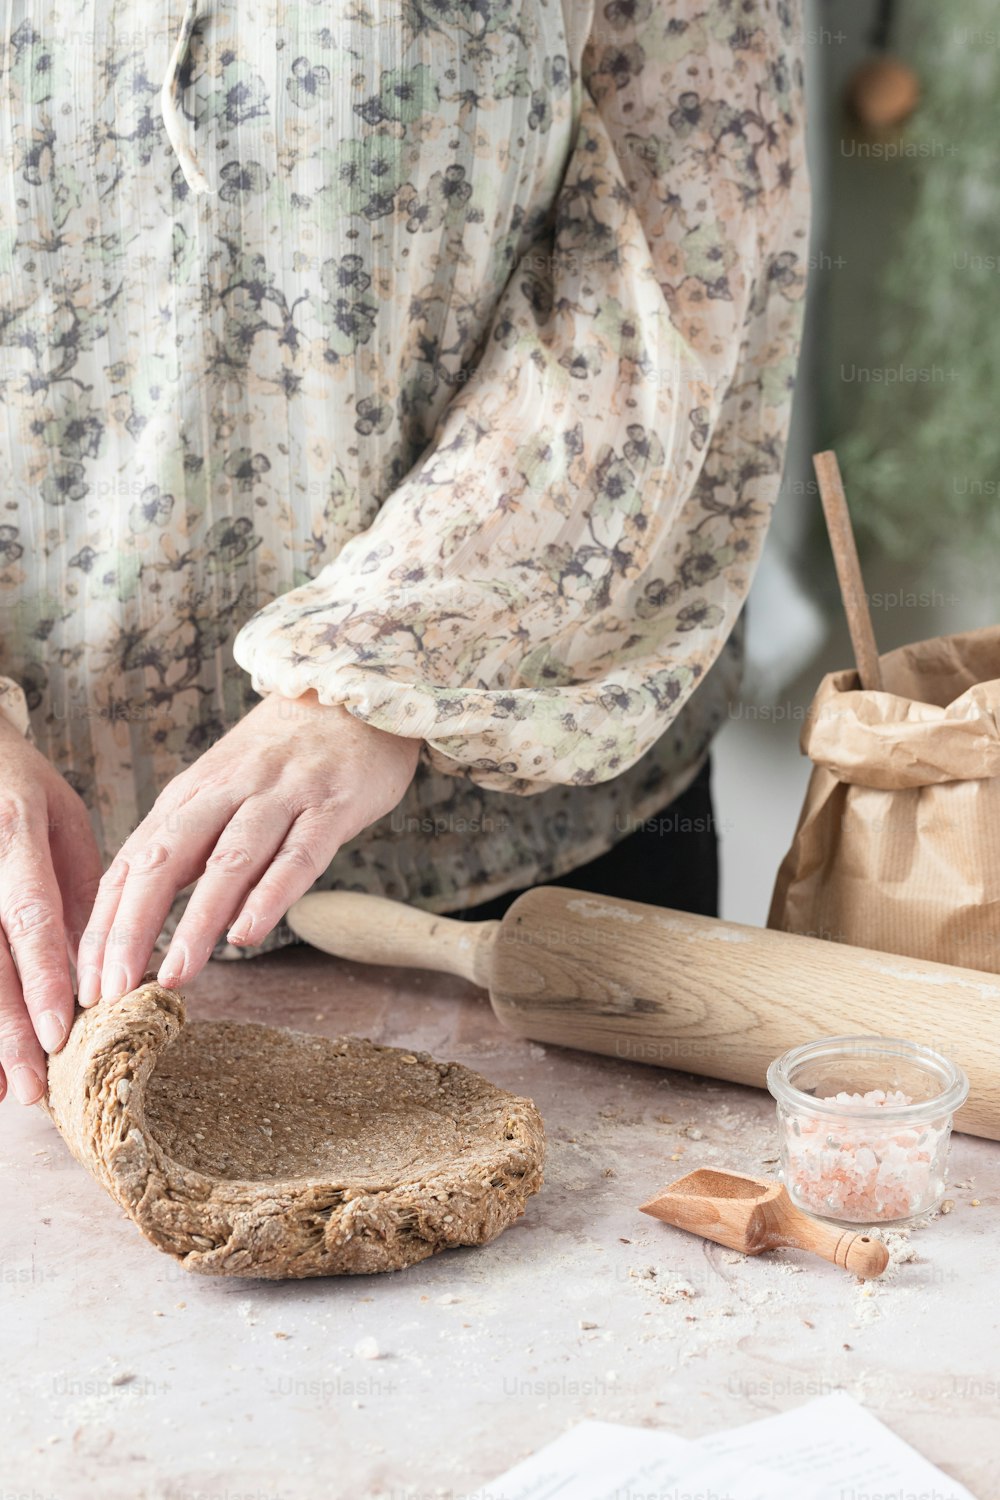 a woman is making bread on a table